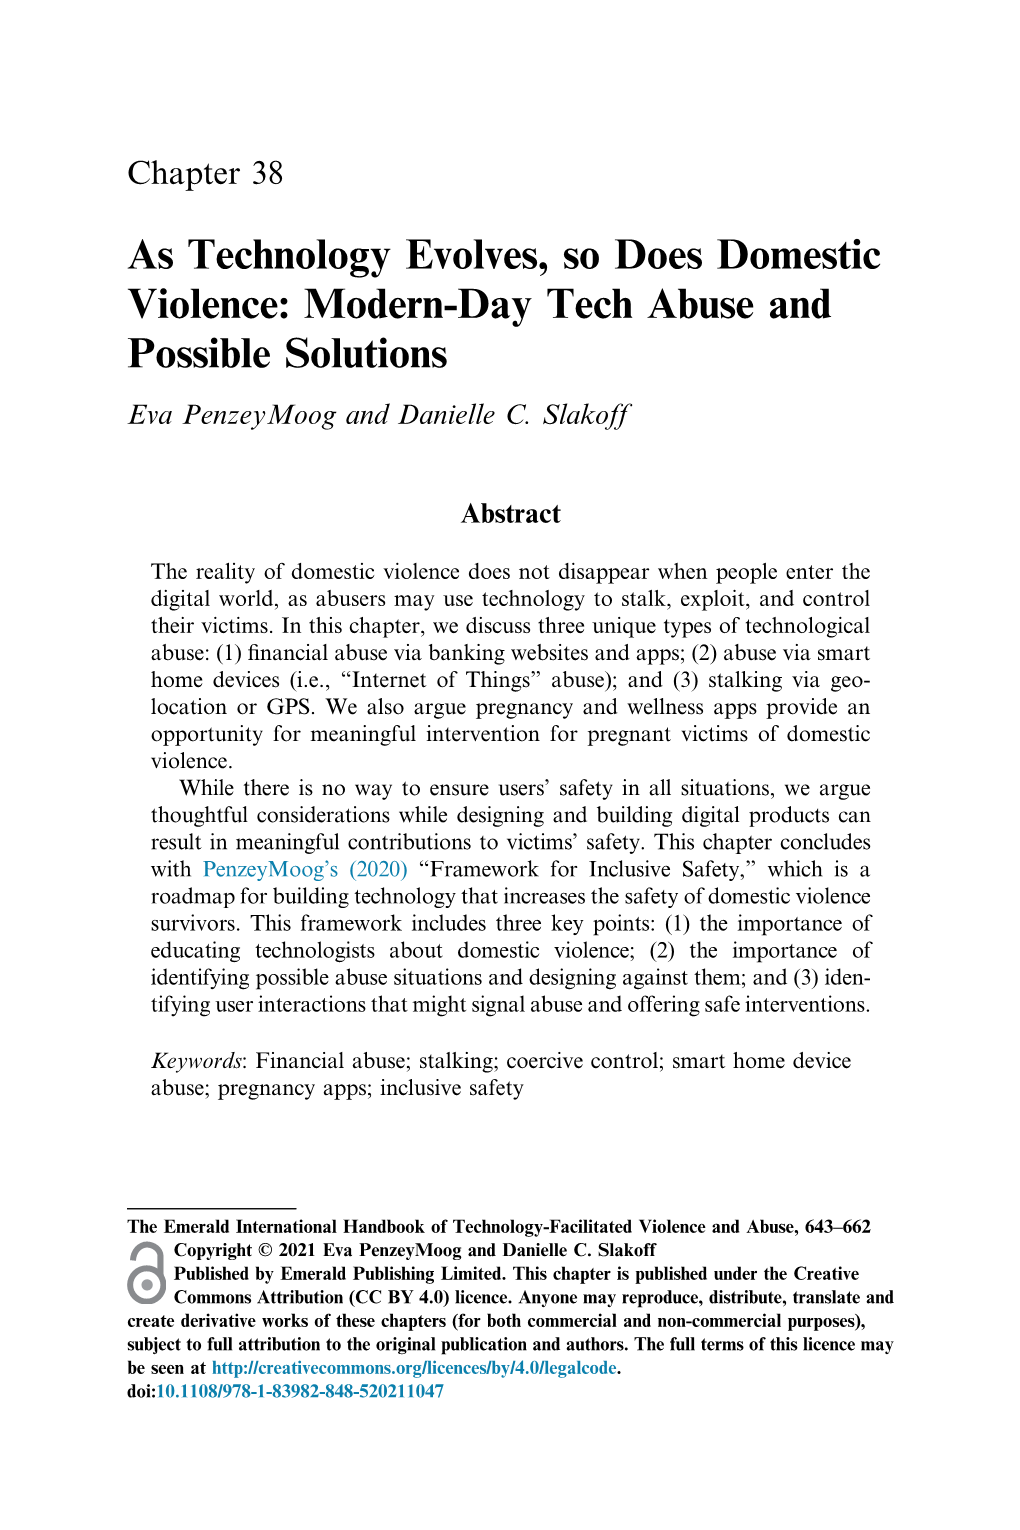 As Technology Evolves, So Does Domestic Violence: Modern-Day Tech Abuse and Possible Solutions Eva Penzeymoog and Danielle C